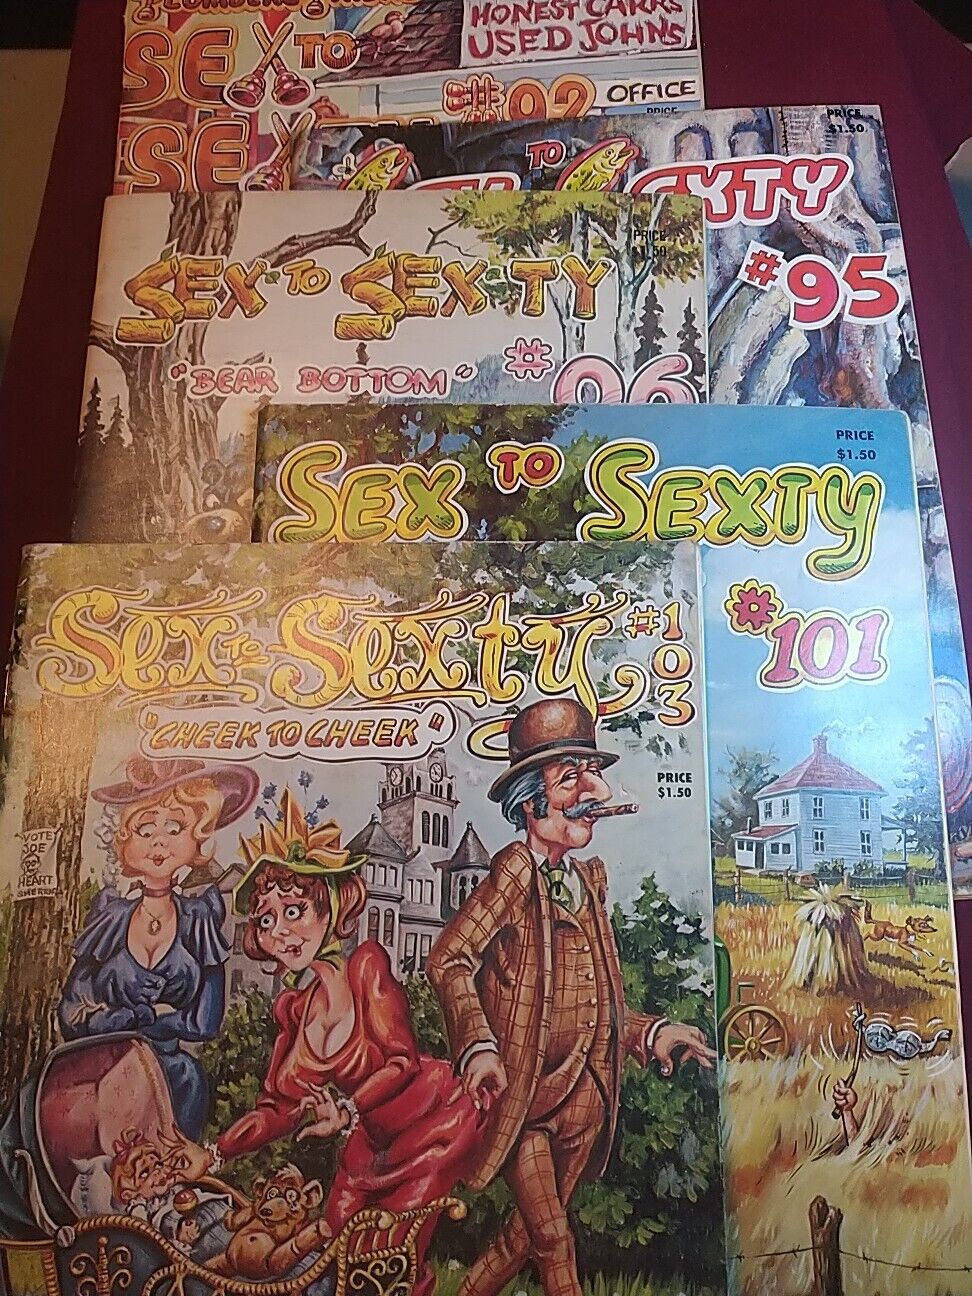 VINTAGE  1977-78 (5)SEX  TO  SEXTY COMIC  BOOKS  ADULT  HUMOR #92,95,96,101,103